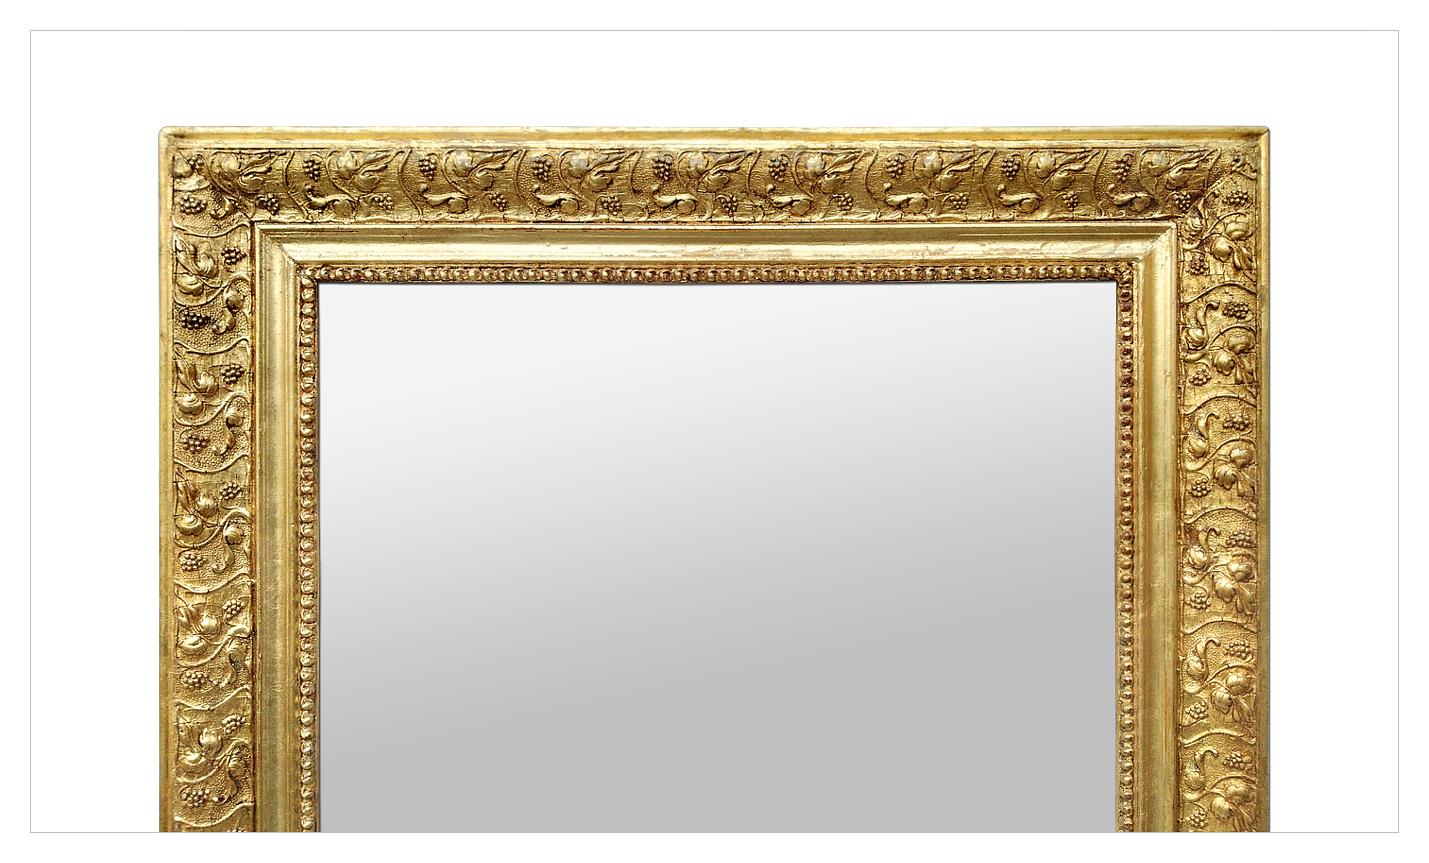 Napoleon III Antique French Mirror Giltwood Decorated with Vine Leaves, circa 1890